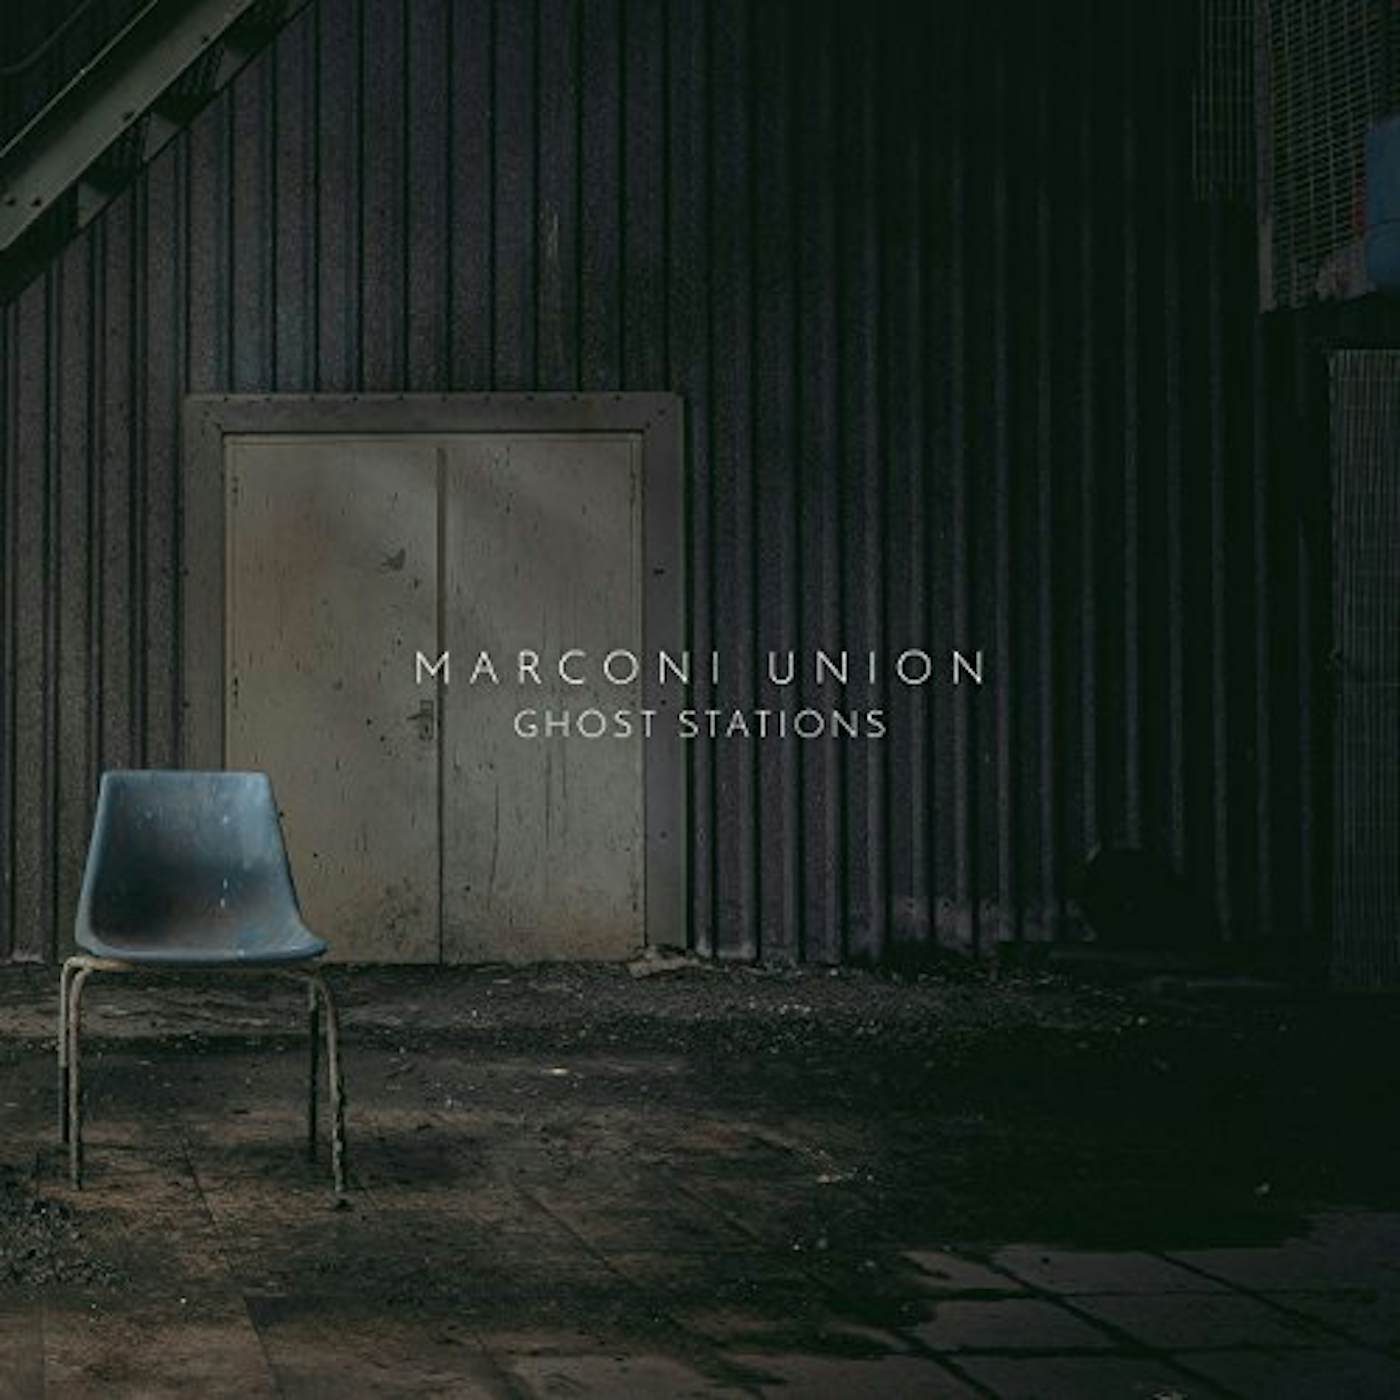 Marconi Union Ghost Stations Remixes Vinyl Record